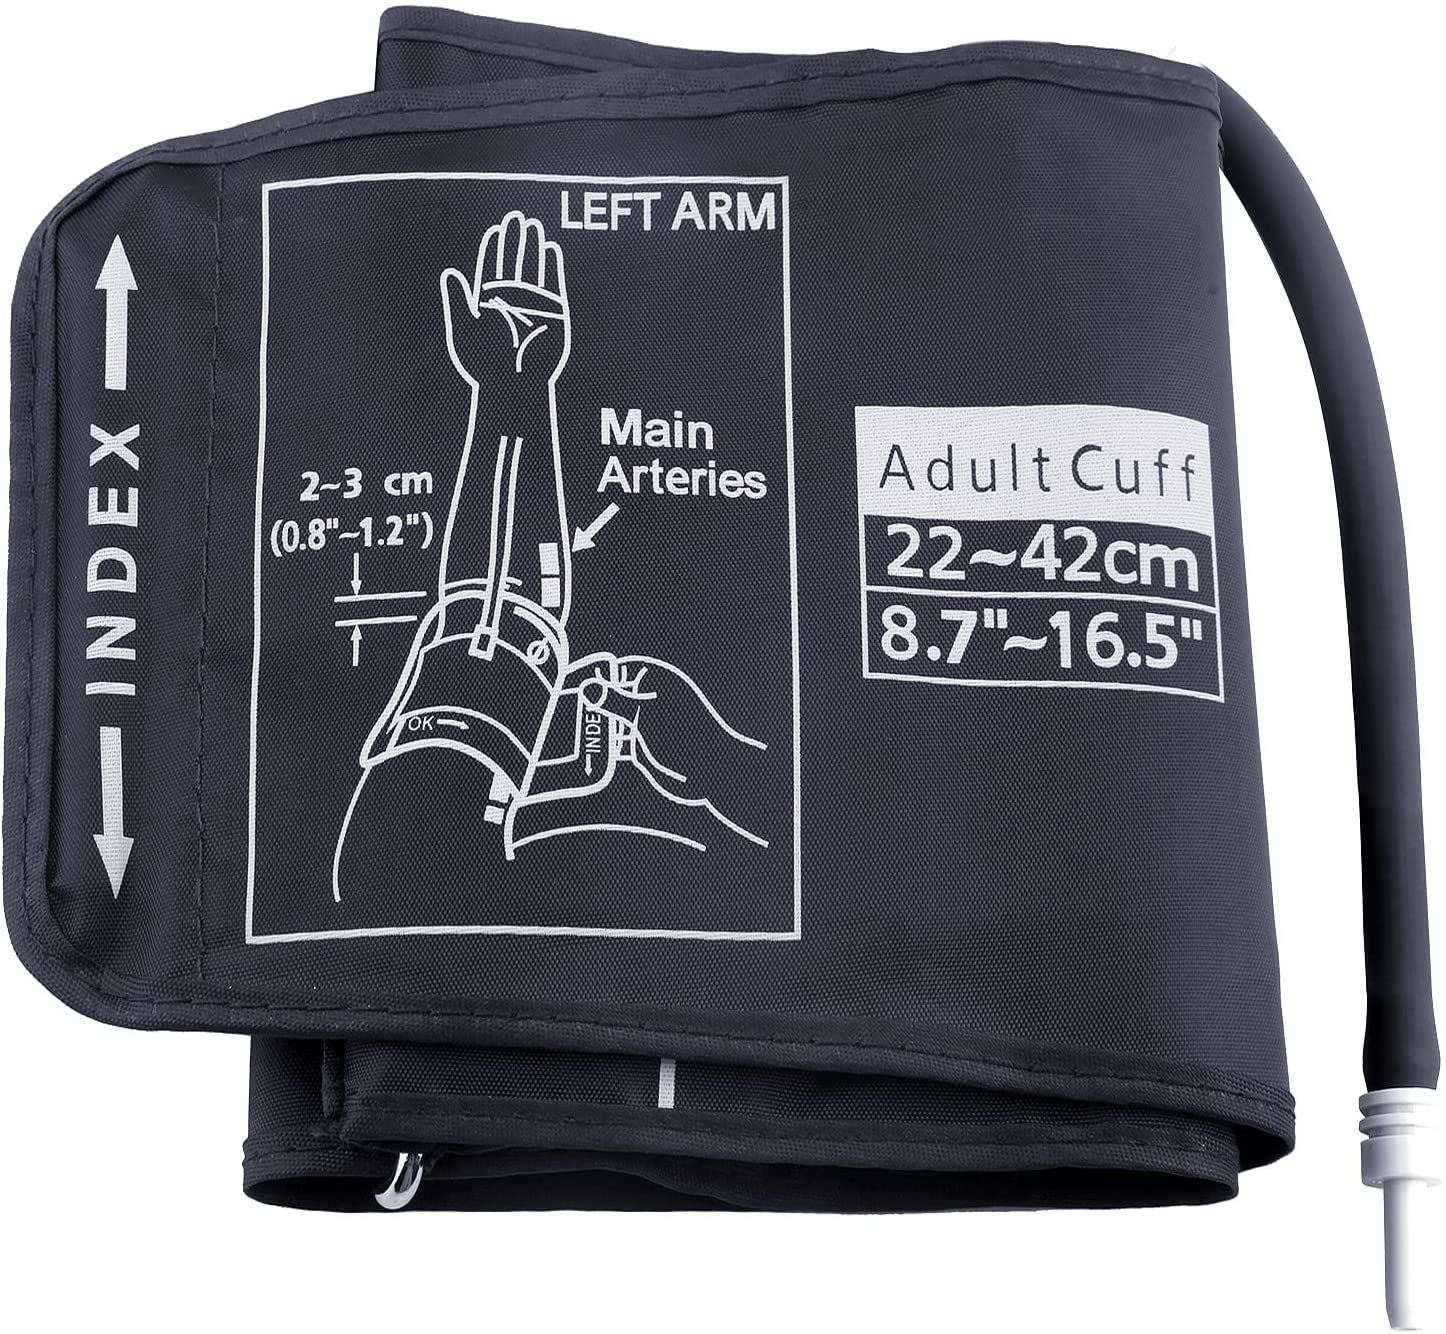 14 Blood Pressure Monitors with Plus-Size Cuffs for Large Arms